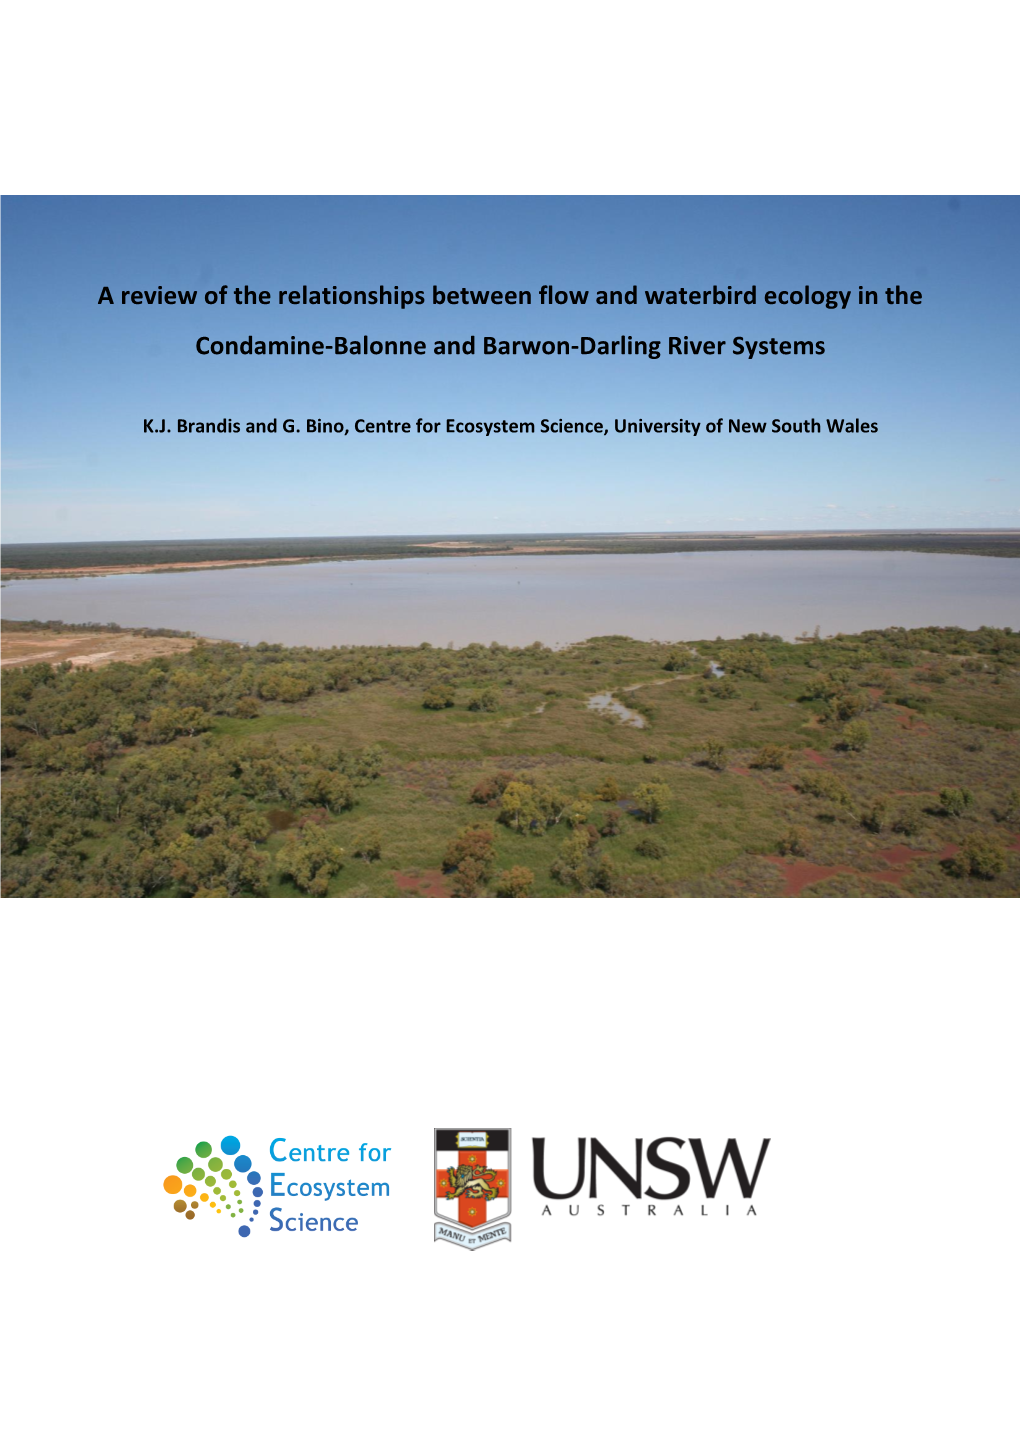 A Review of the Relationships Between Flow and Waterbird Ecology in the Condamine-Balonne and Barwon-Darling River Systems